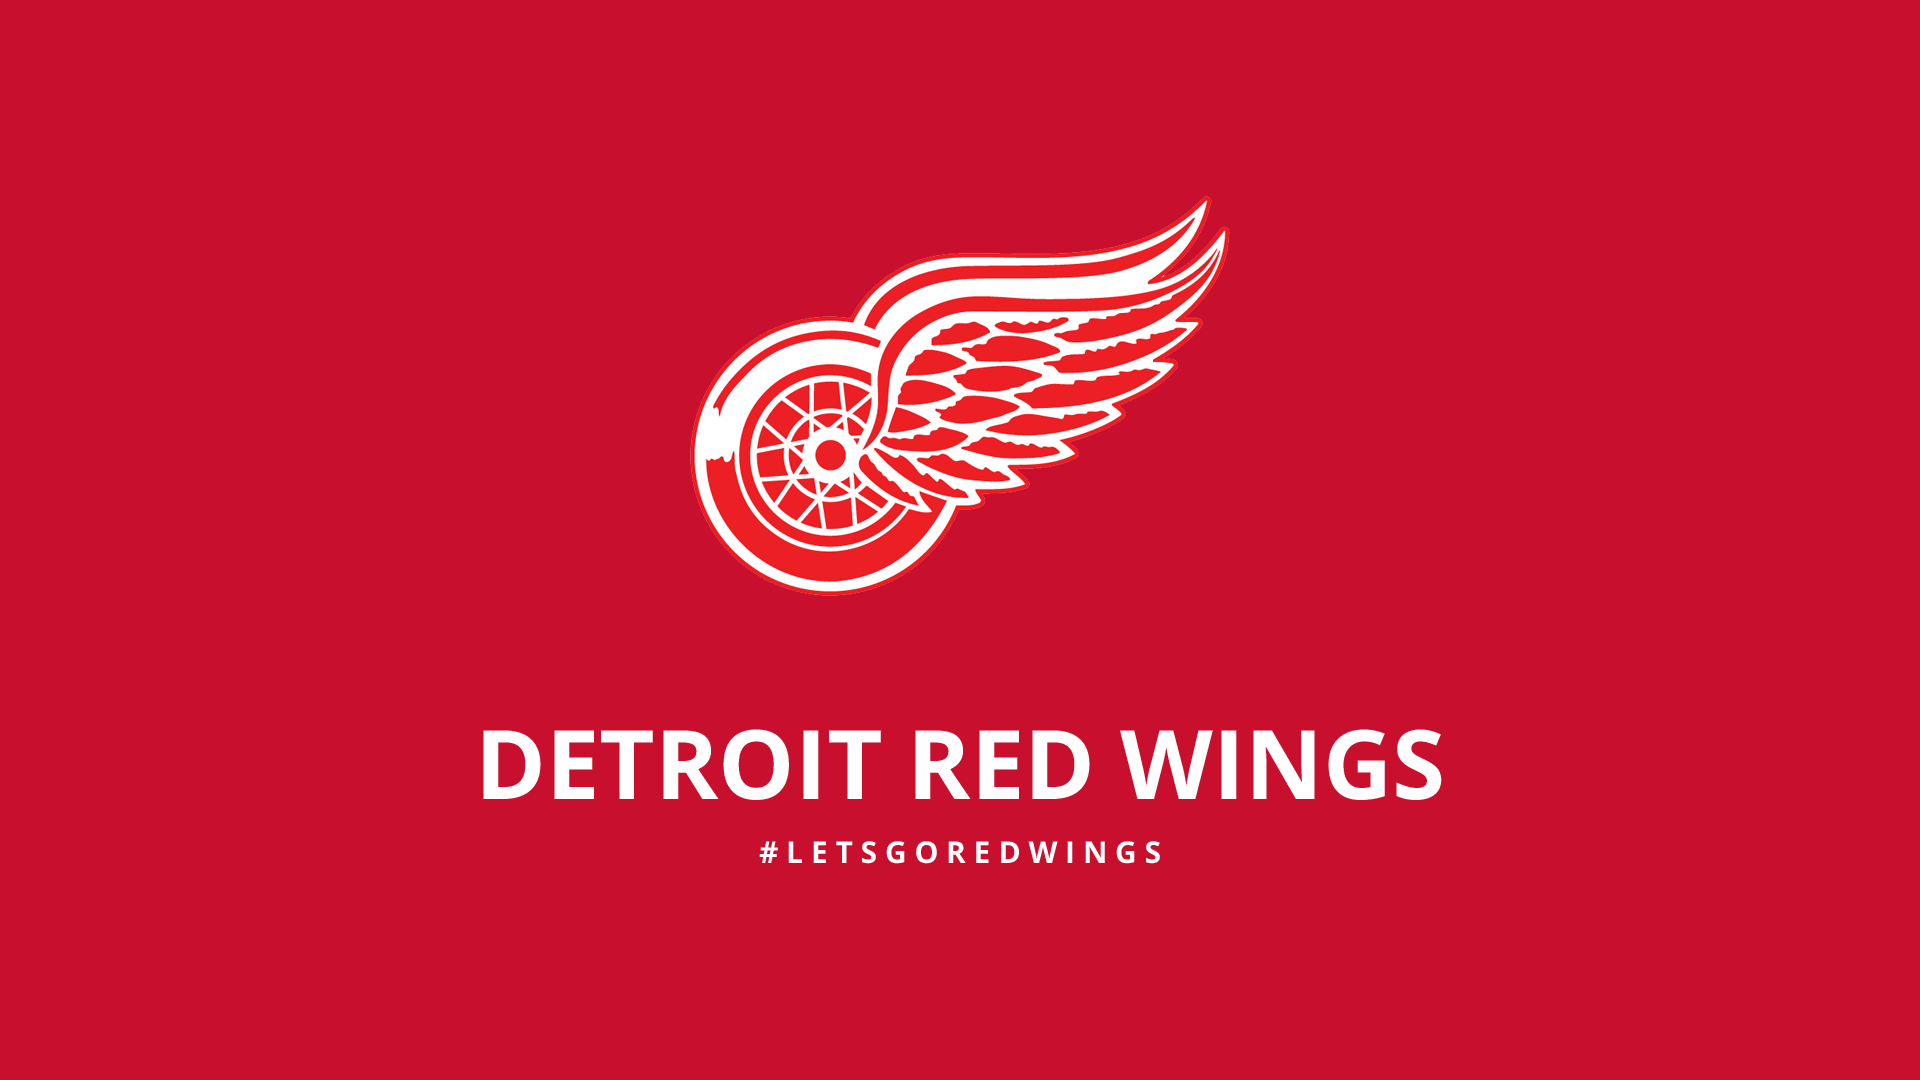 Minimalist Detroit Red Wings Wallpaper By Lfiore